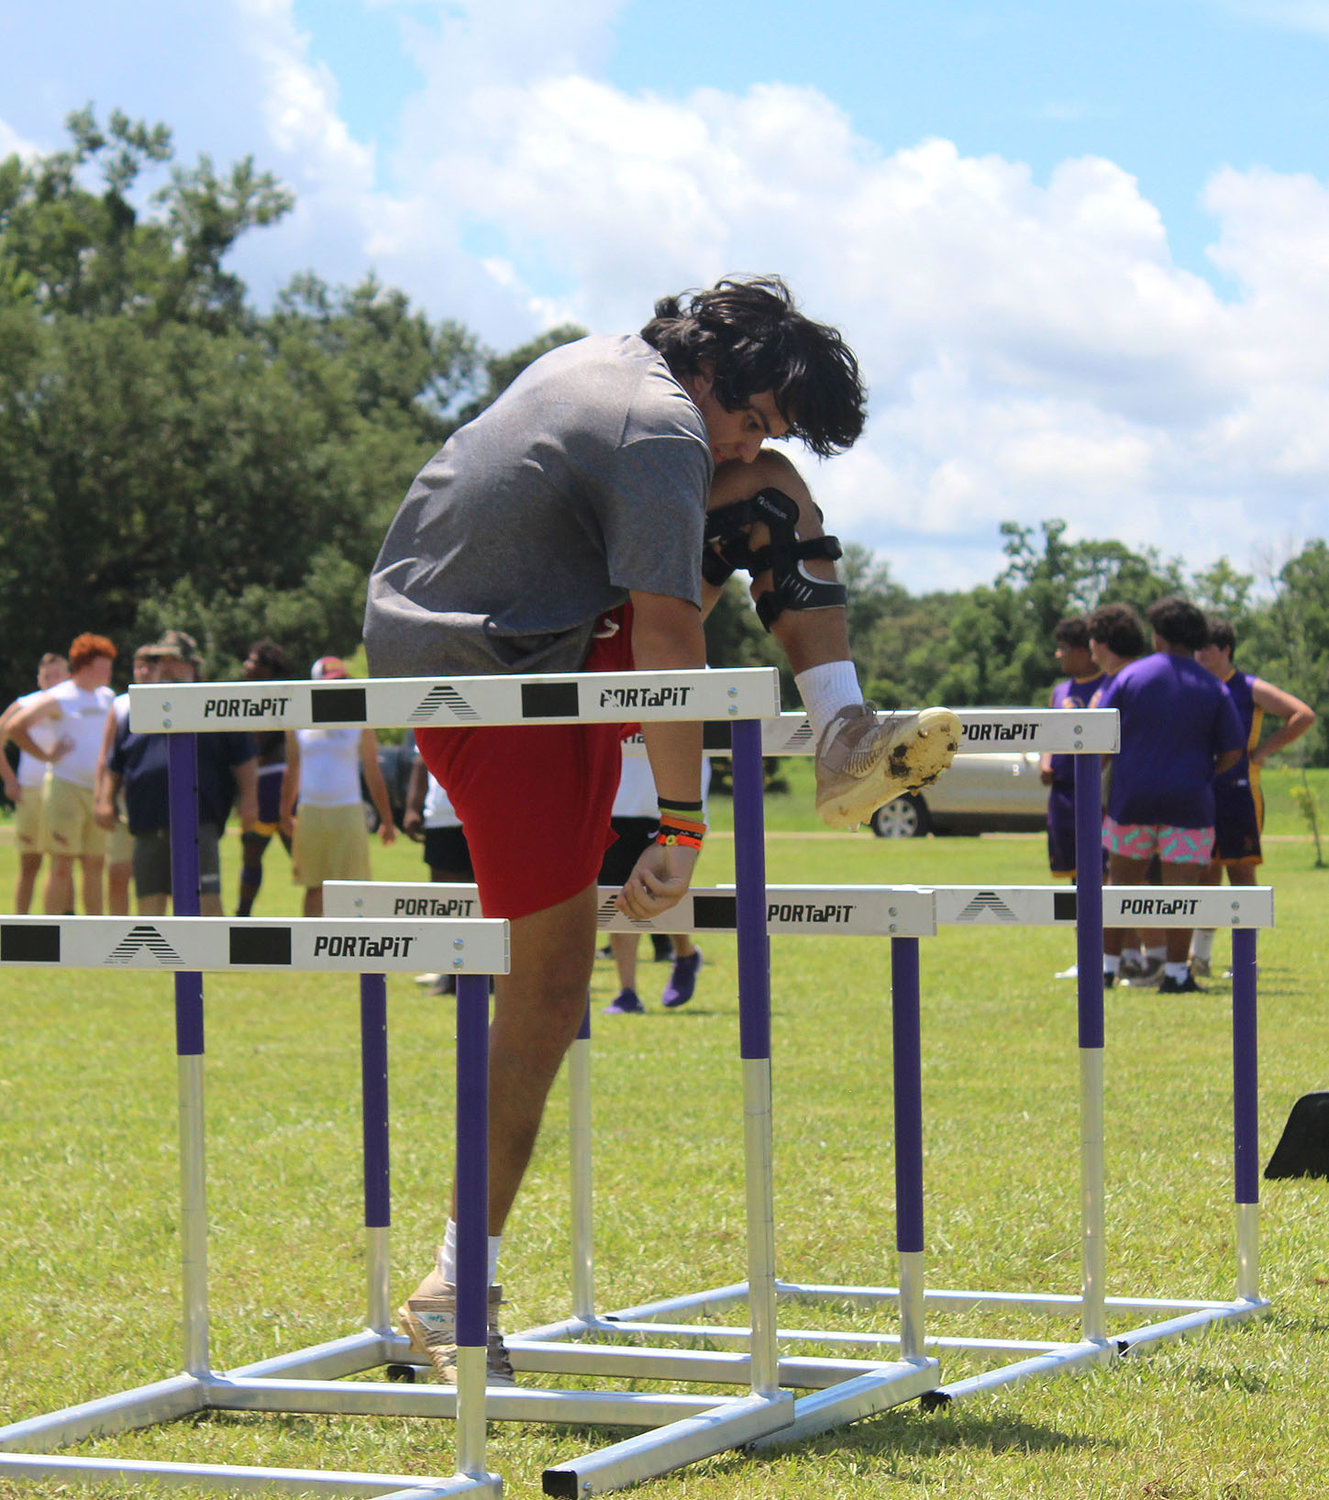 St. Michael junior Jovi Werner maneuvers the hurdles as part of the obstacle course during the Big Man Tournament at Daphne's Al Trione Sports Complex last Thursday.